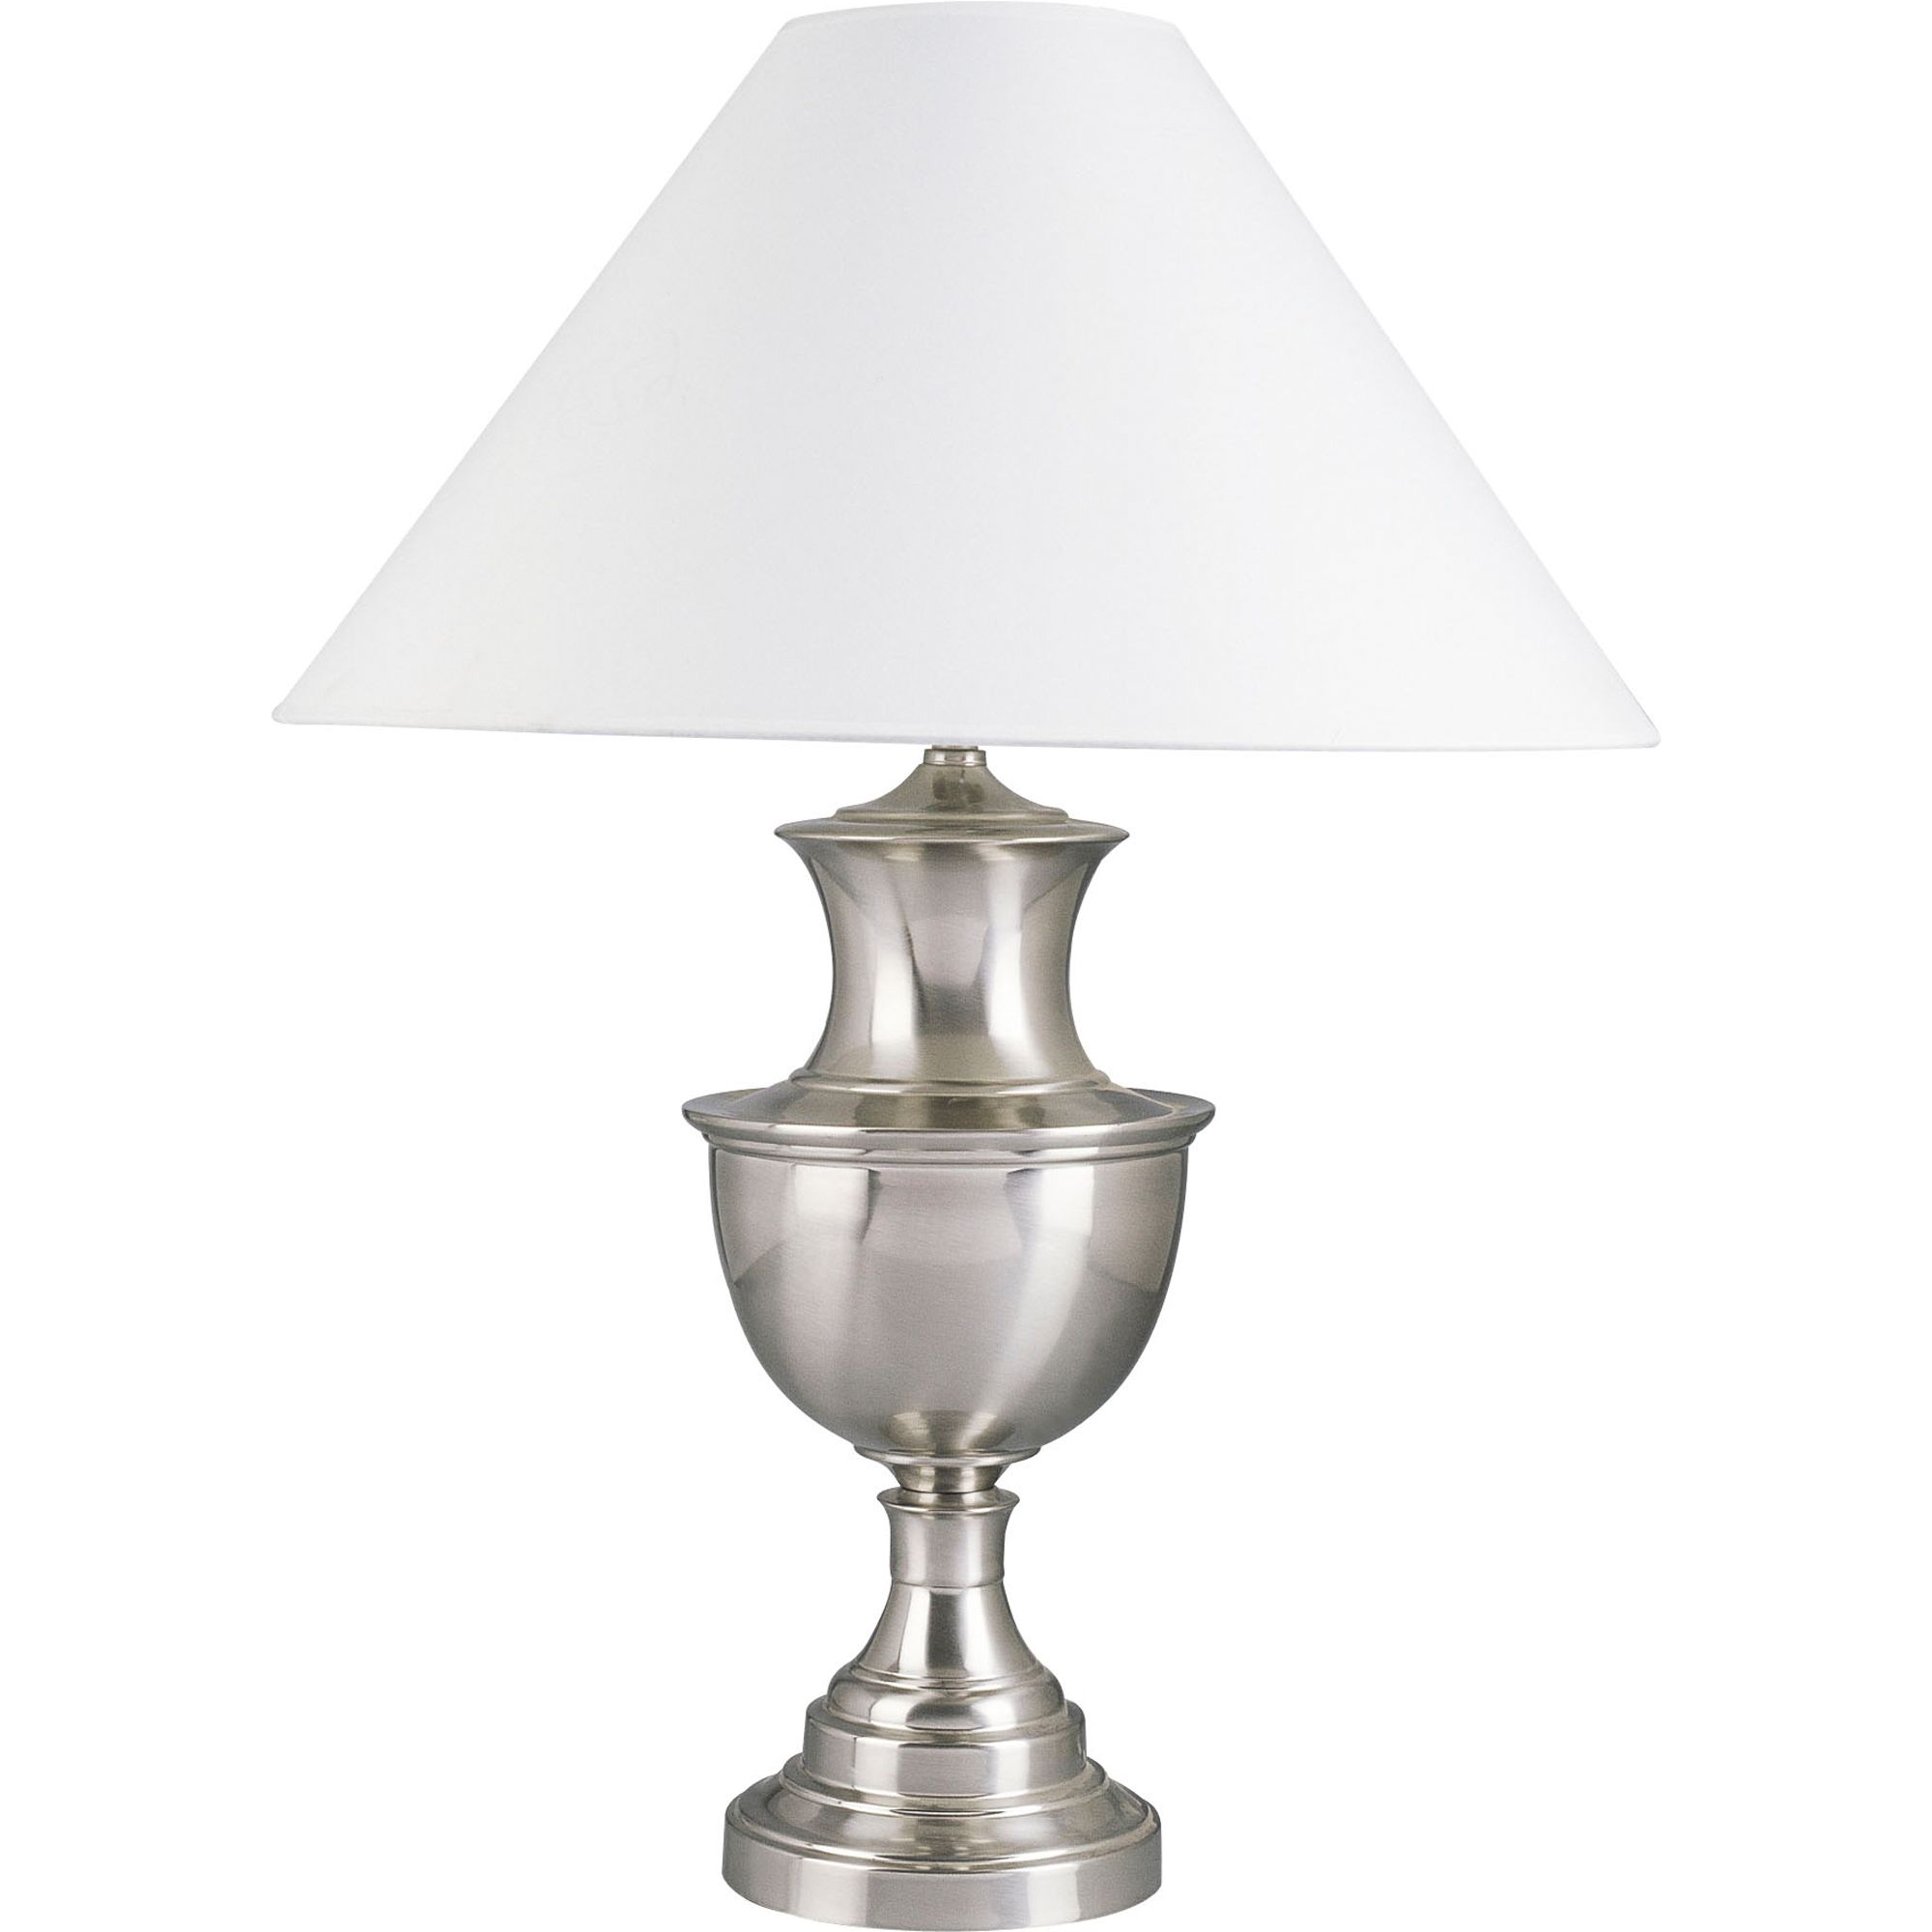 Classic Metal Table Lamp with Curvy Base in Satin Nickel